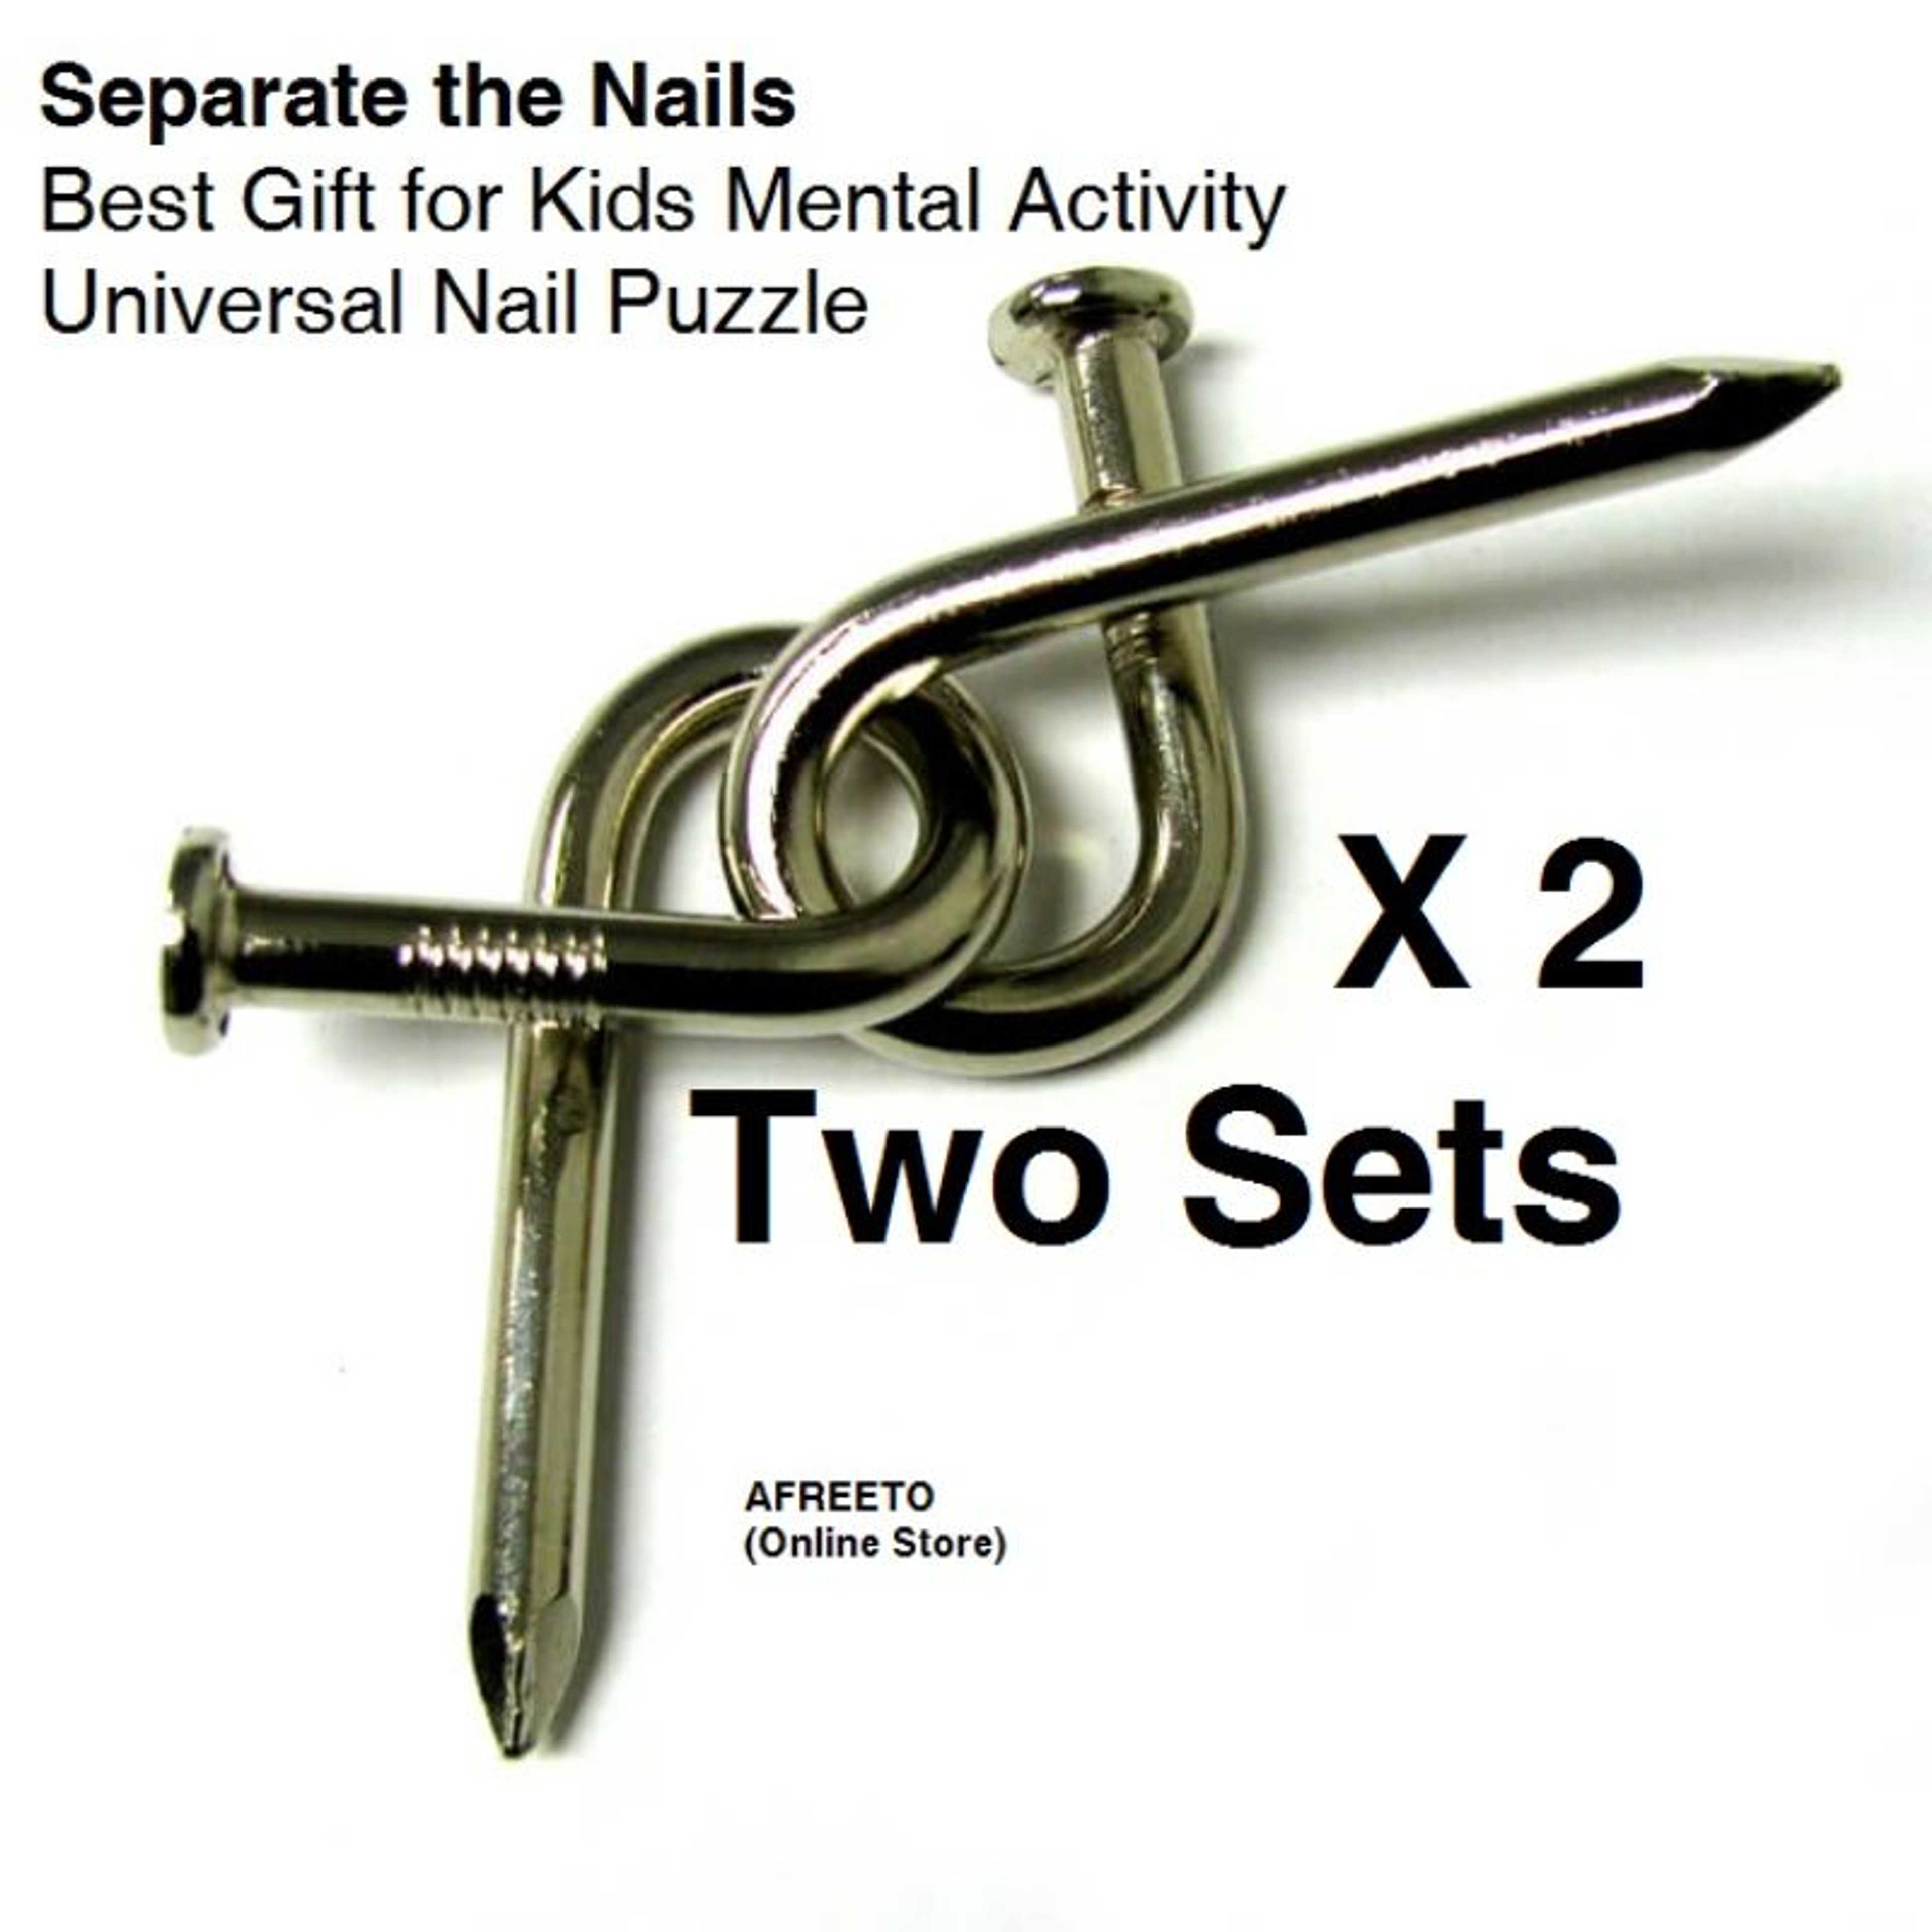 "Twisted Nails Puzzle Magic Trick - Bent Nail Puzzle - Brain Puzzles for Kids - Brain Teasers Puzzles "